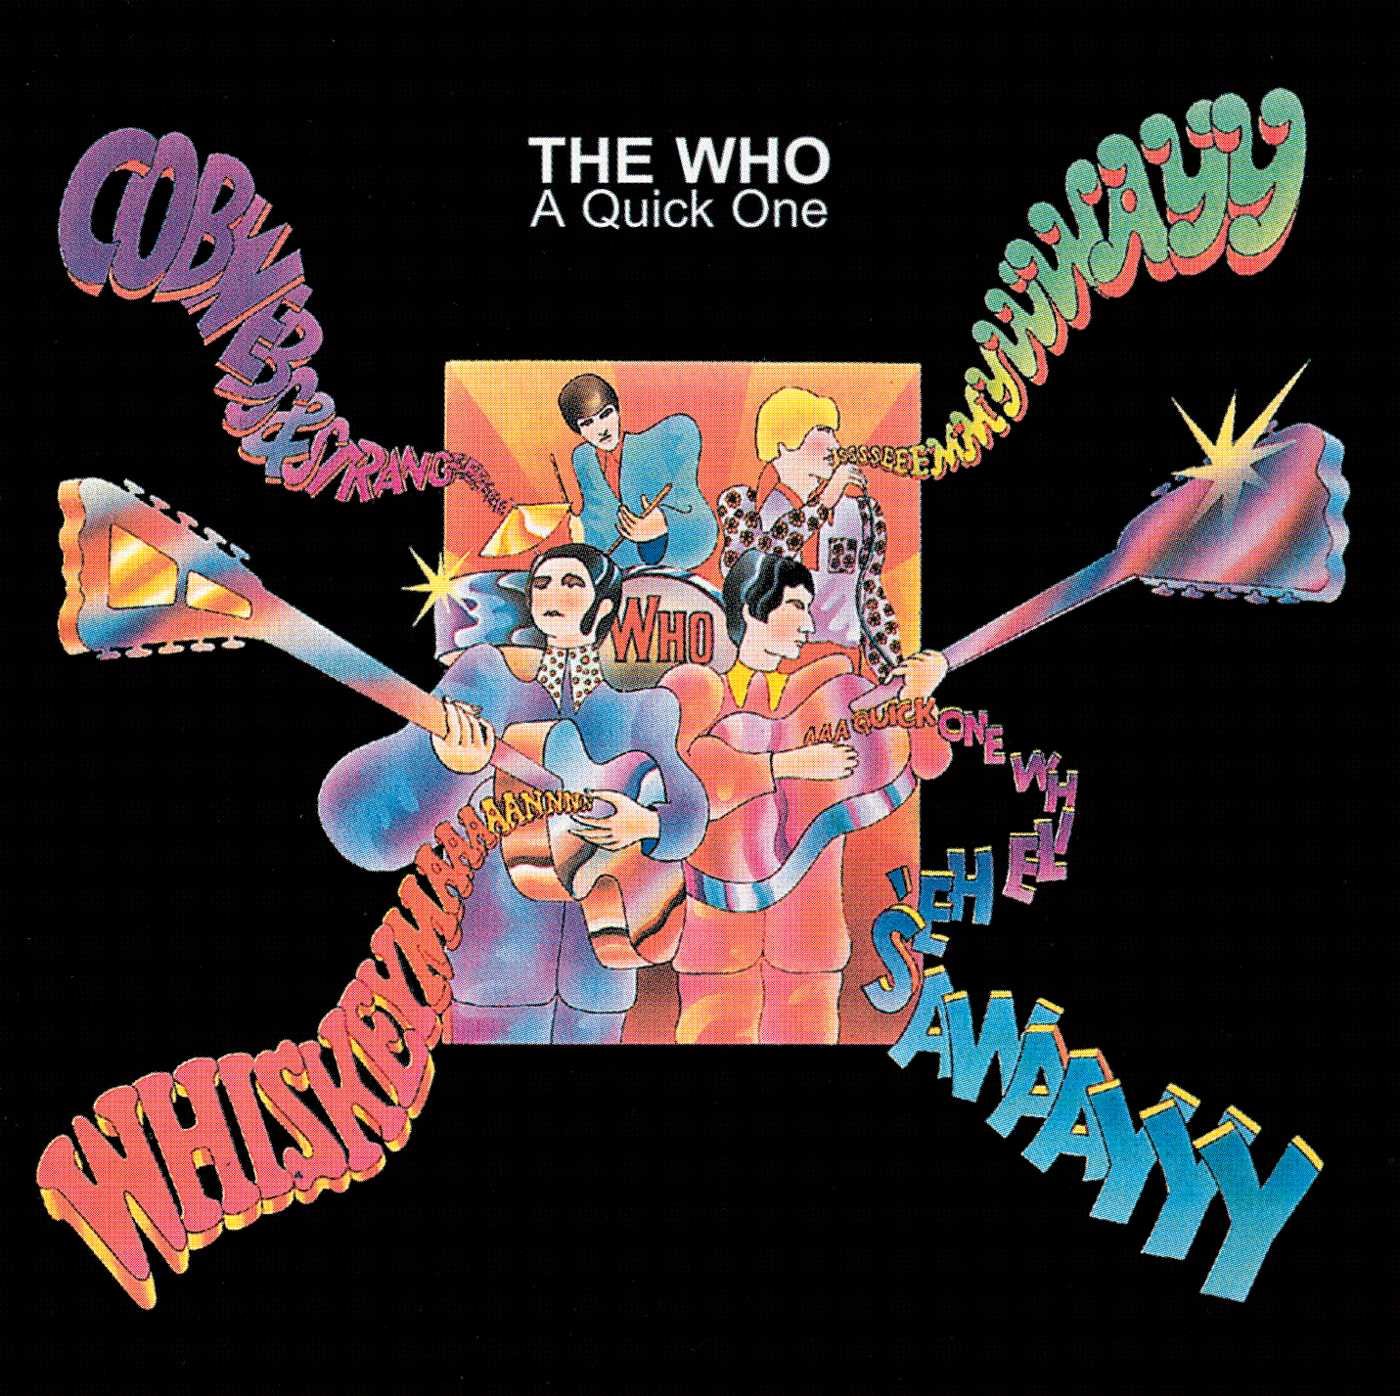 The Who"A Quick One" LP